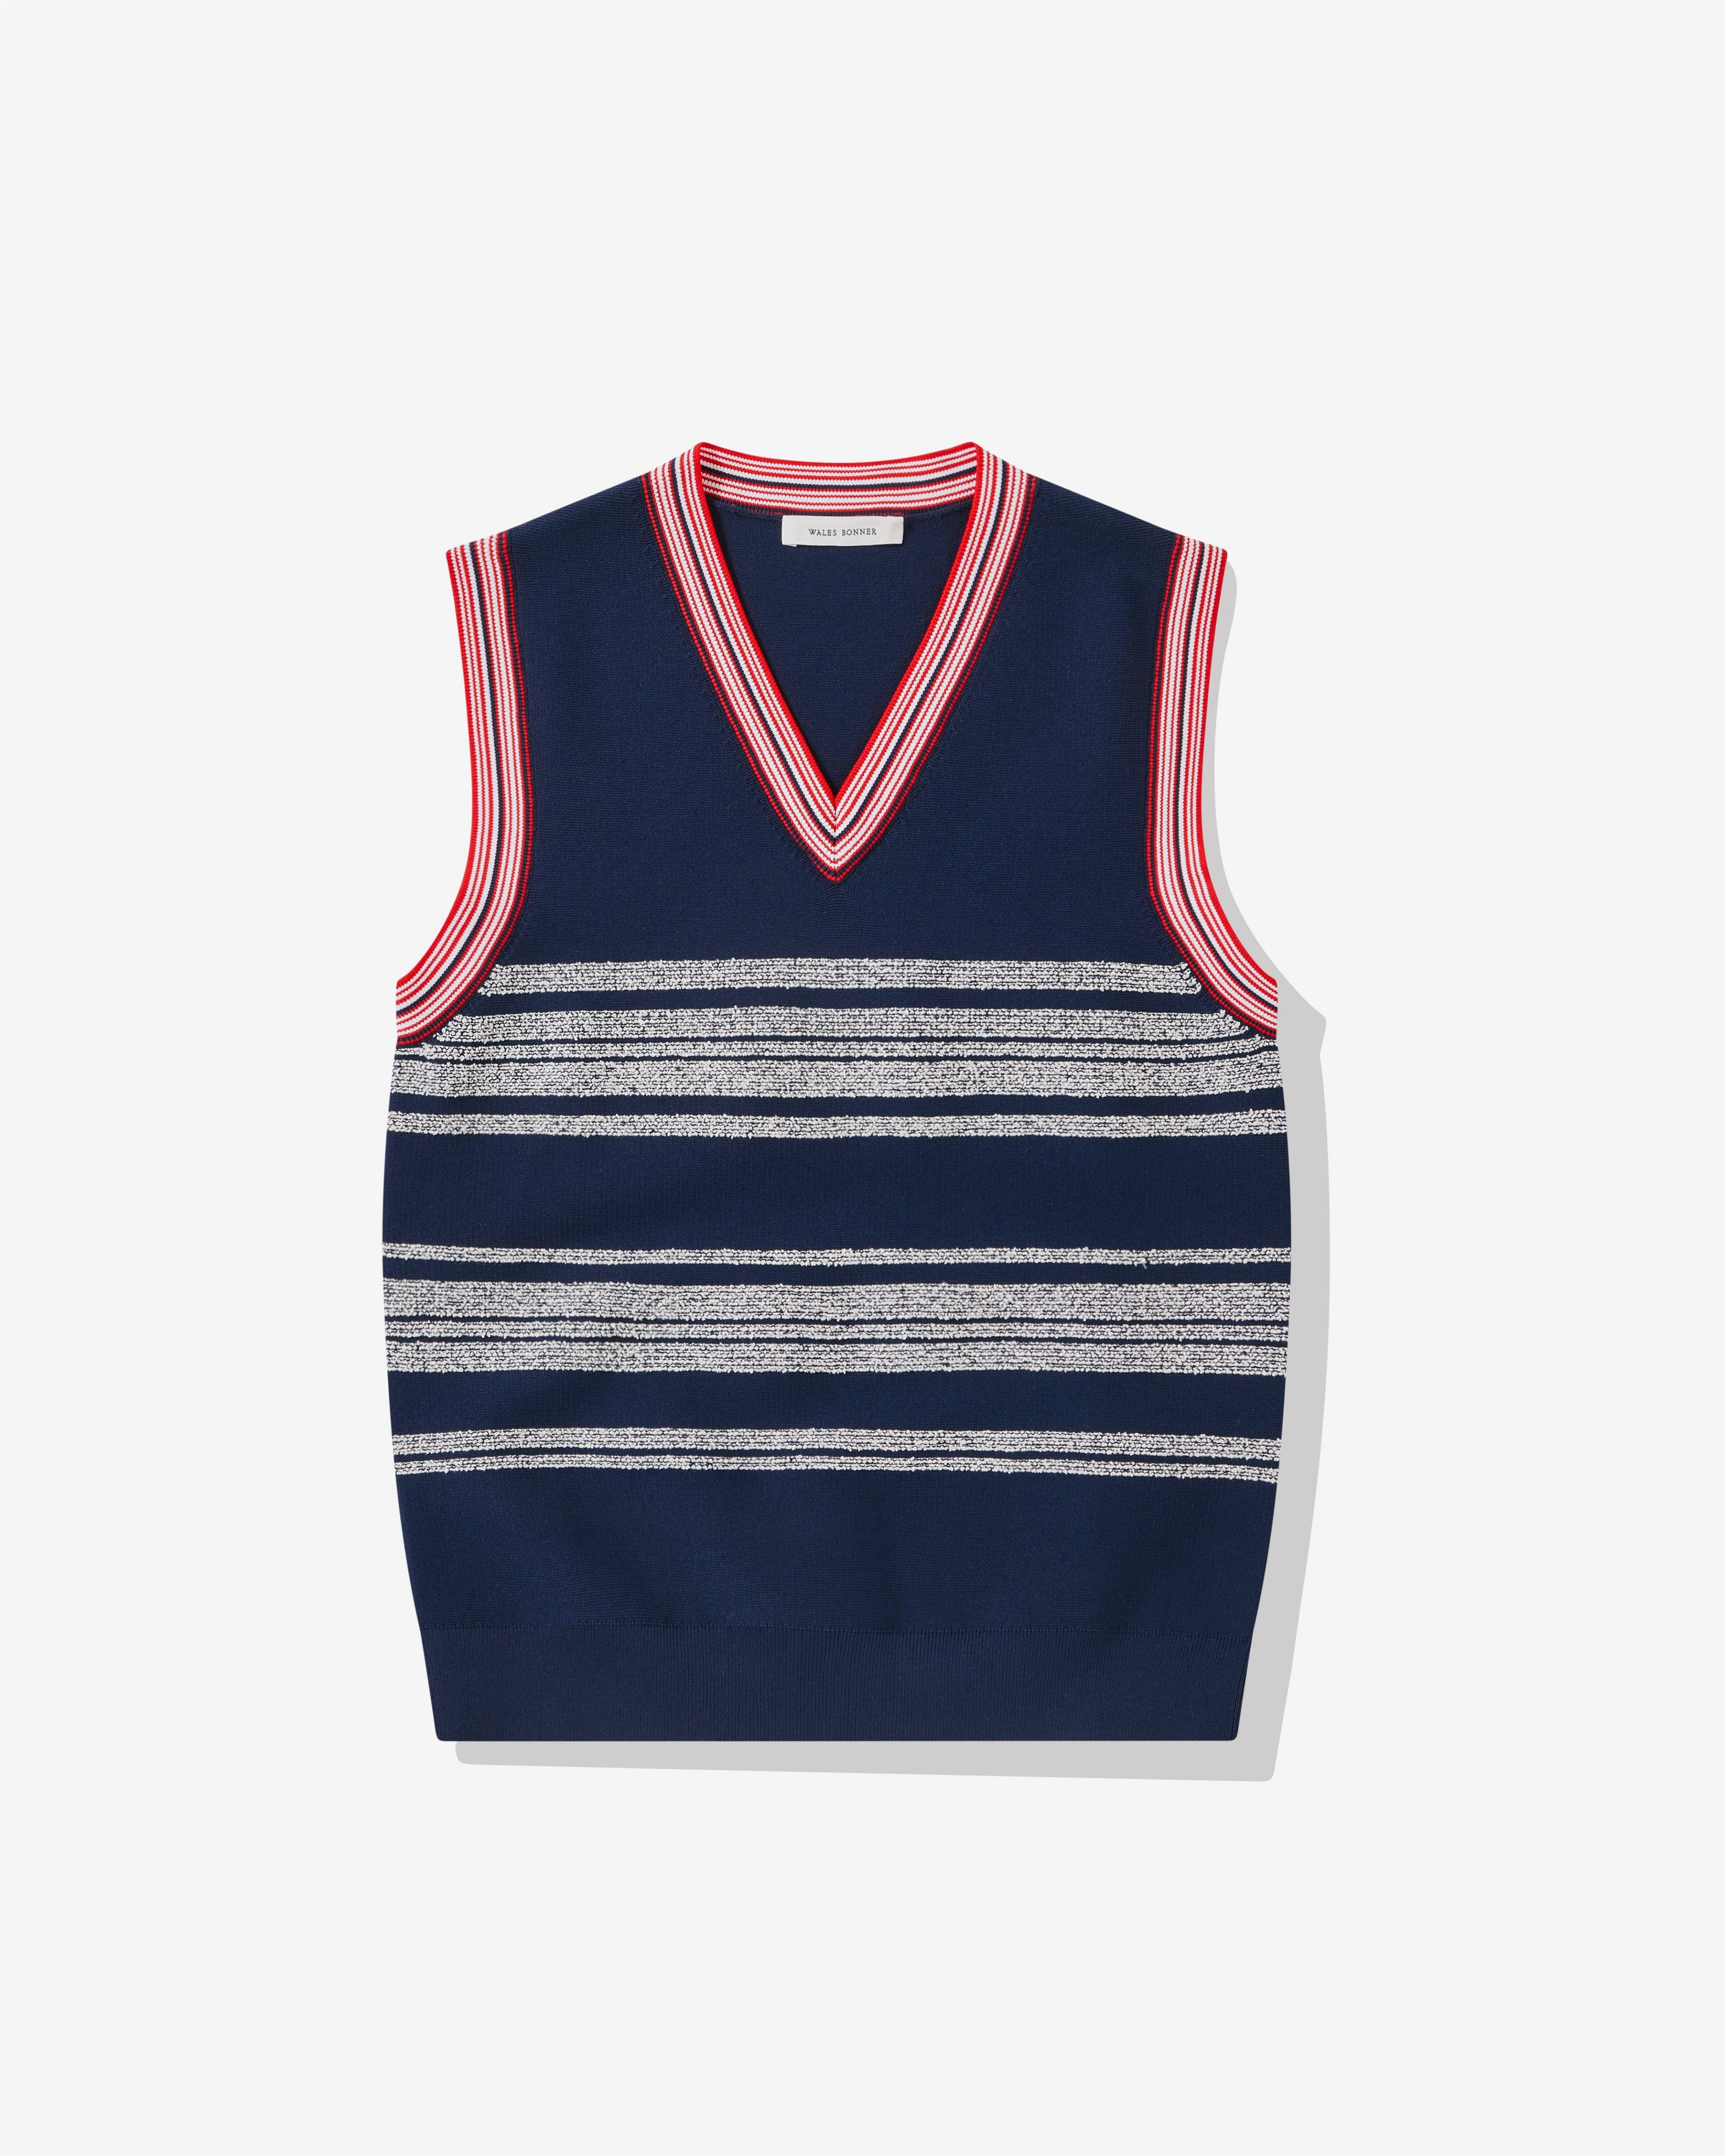 Wales Bonner - Men's Shade Vest - (Navy/Red/White) by WALES BONNER